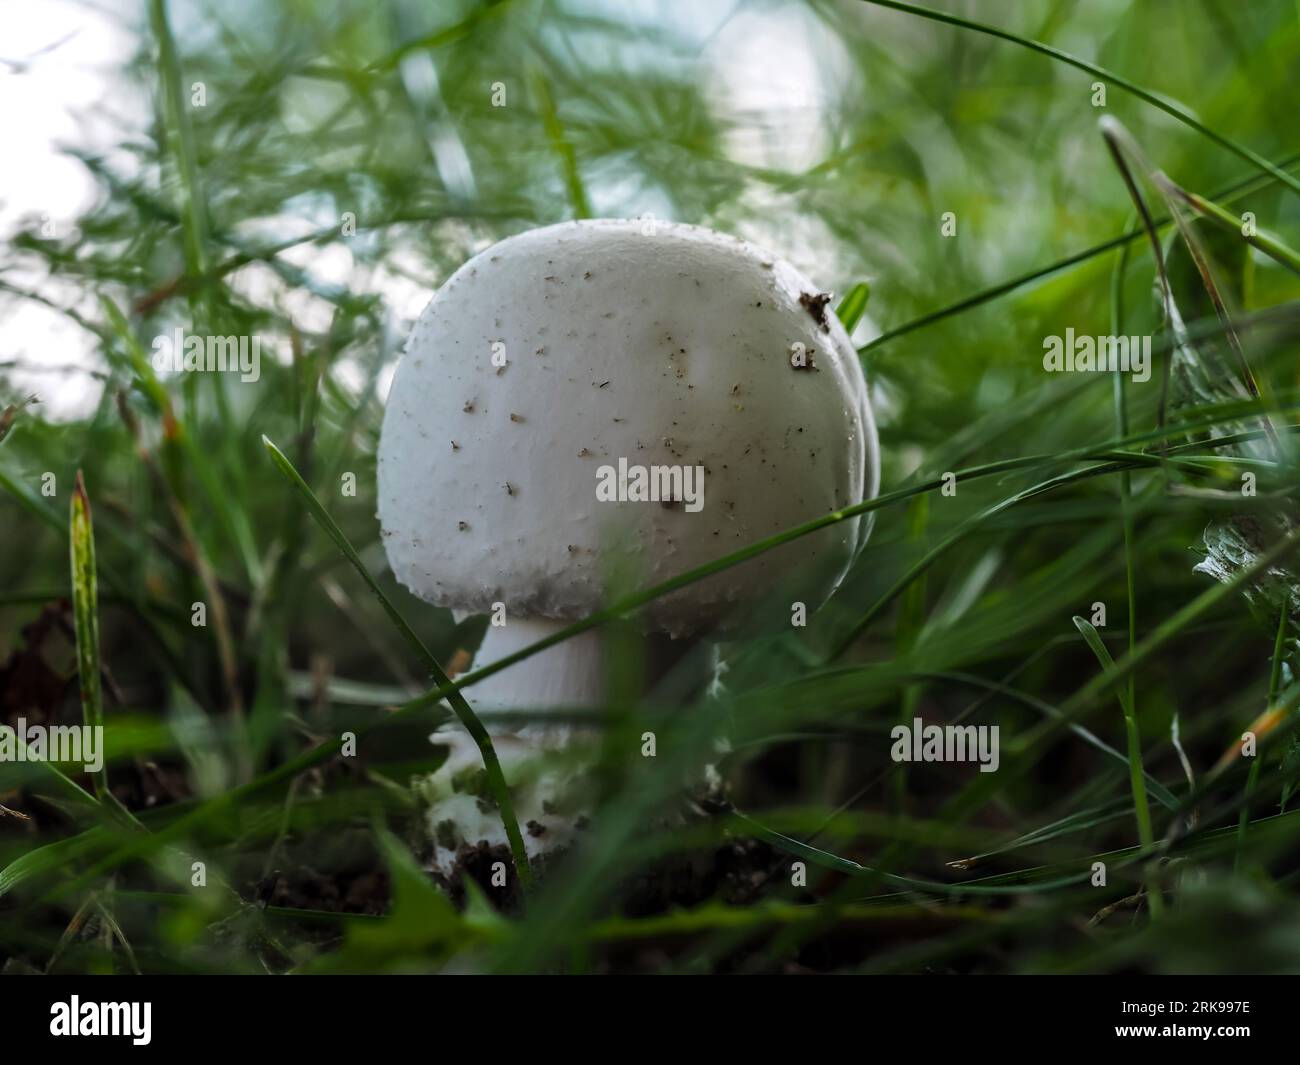 Tuberous mushroom in natural habitat,Agaricus silvicola,Edible mushroom,tasty,anise scent,white bell-shaped young mushroom fruiting body close up on a Stock Photo